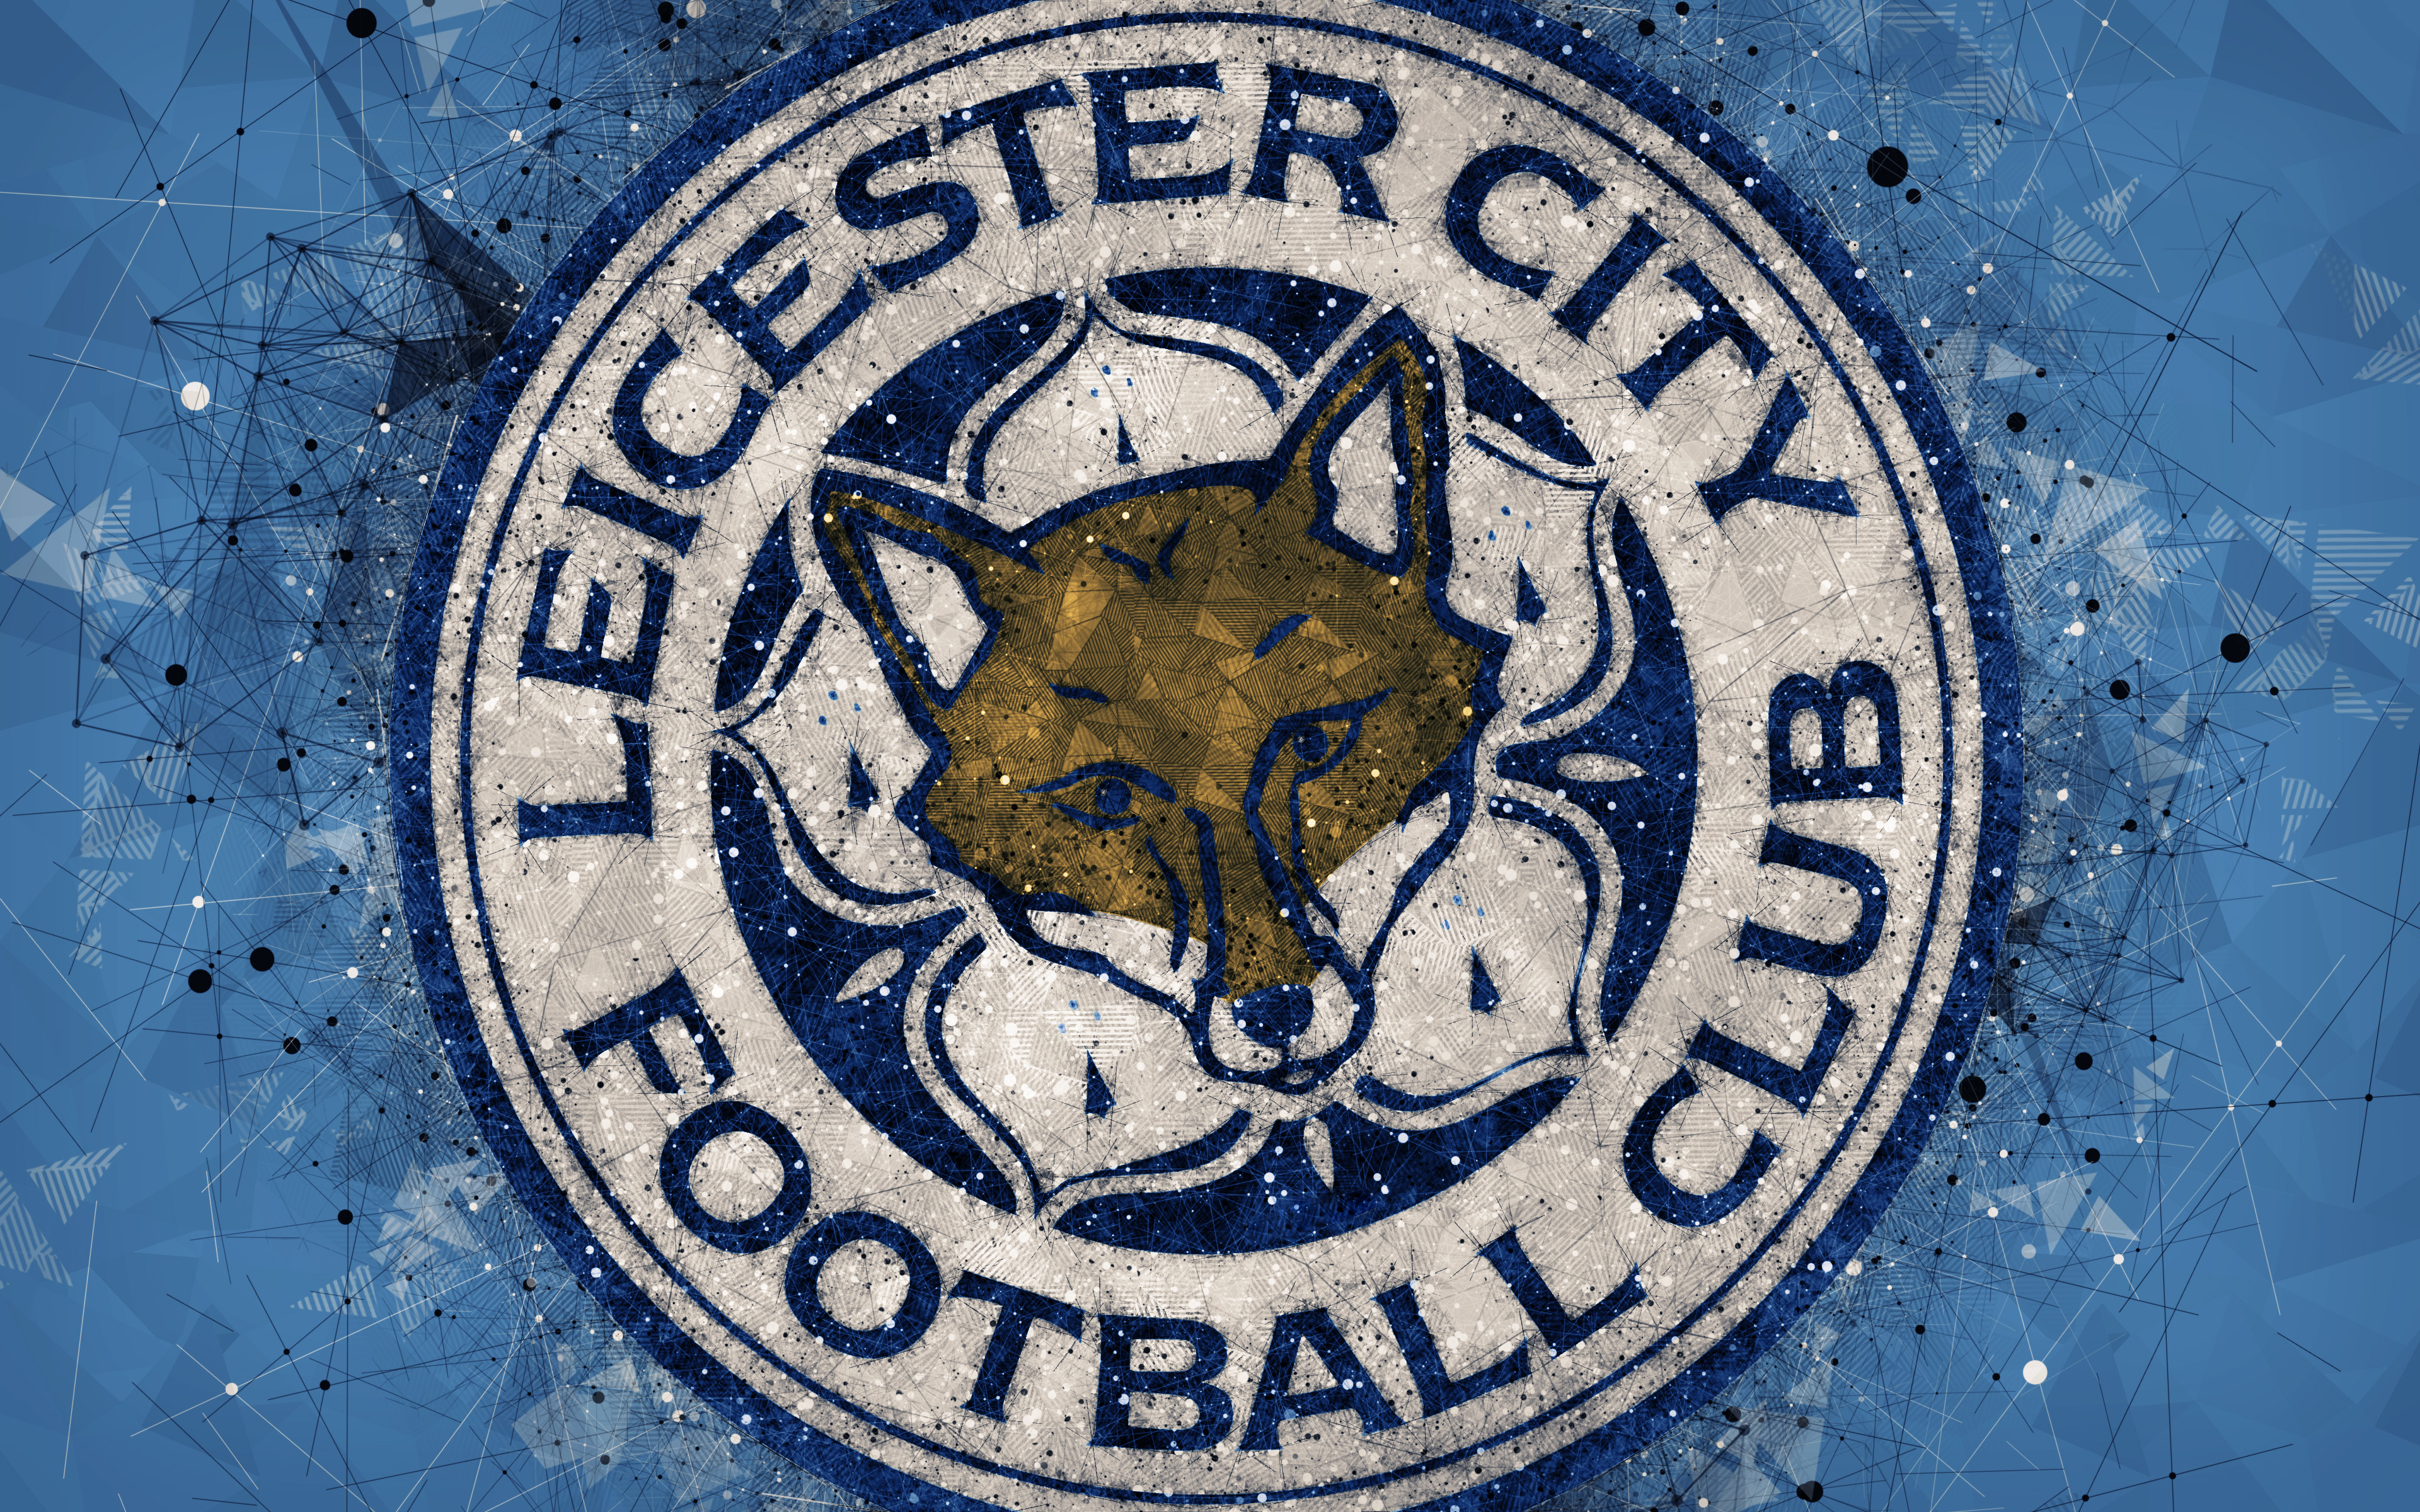 Leicester City F.C. Wallpapers